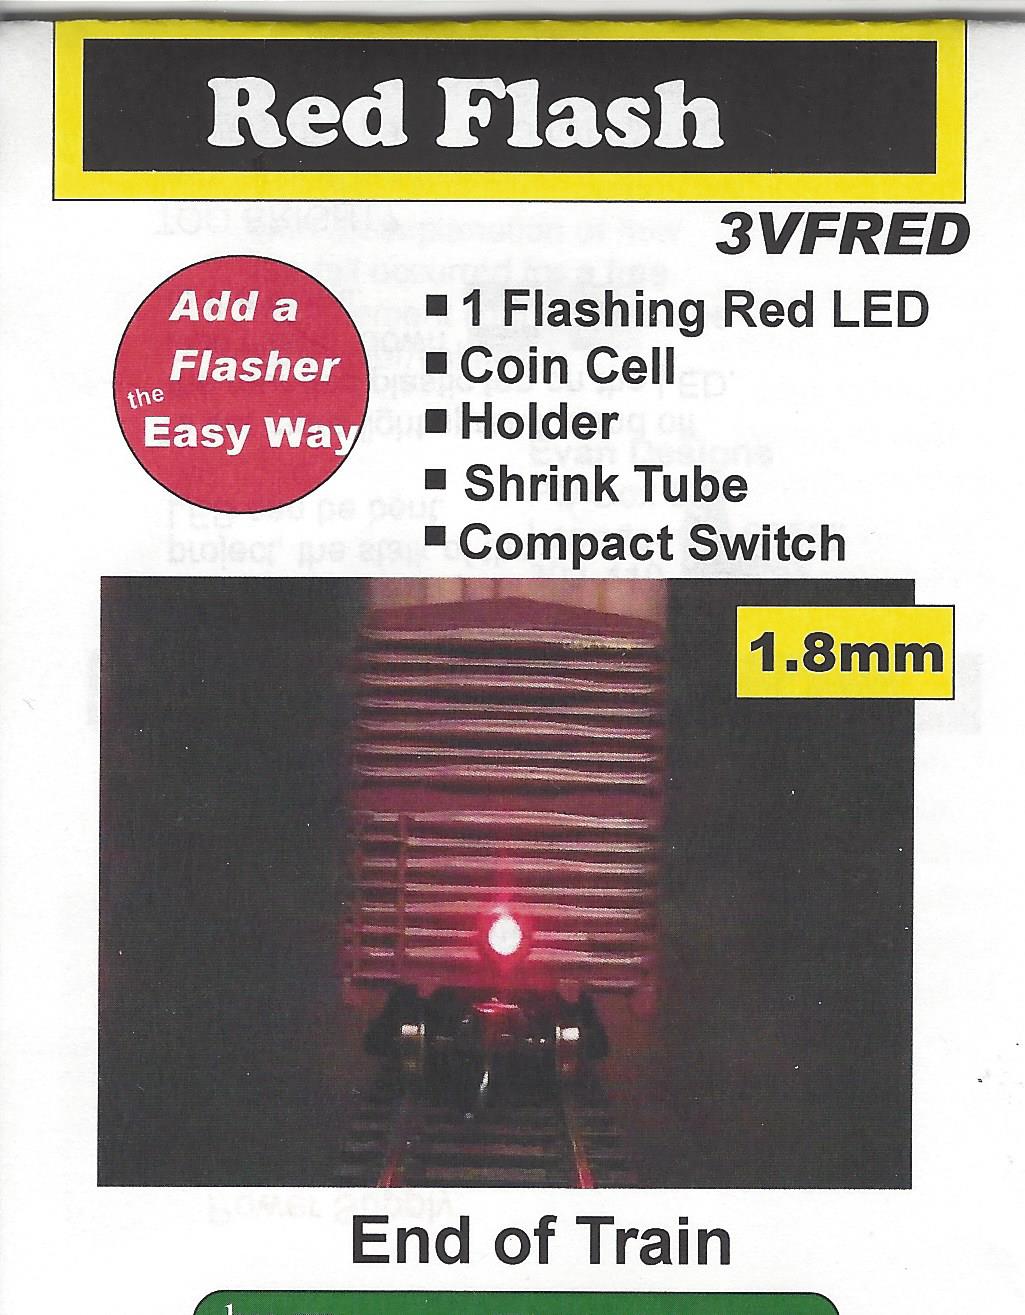 3VFred Bright Red Flashing End of Train Light LED by Evan Designs